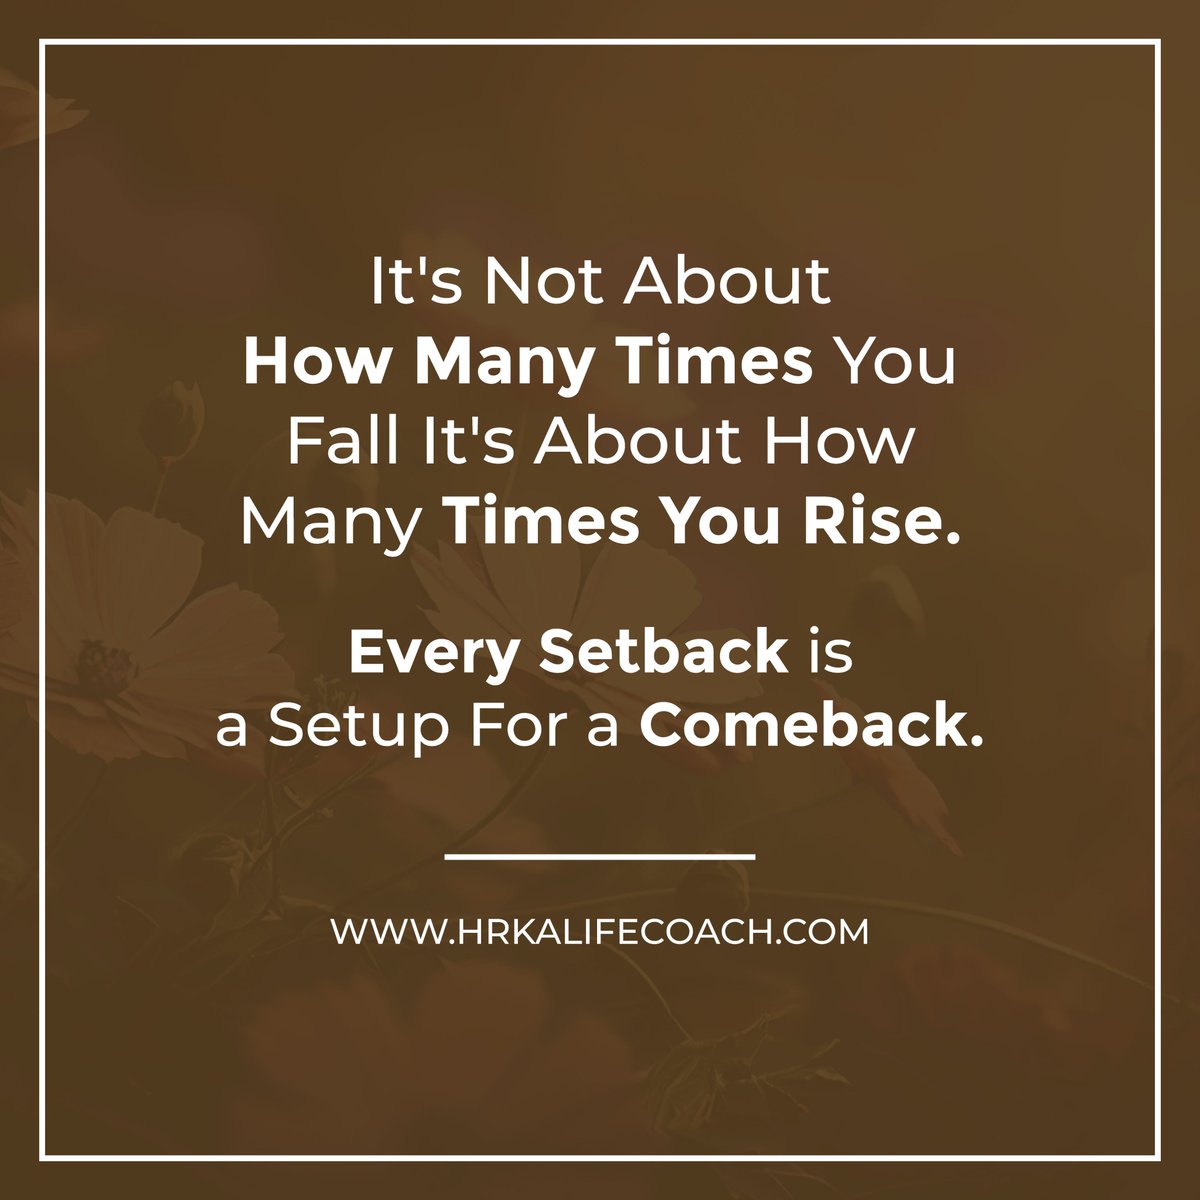 It's not about how many times you fall it's about how many times you rise. Every setback is a setup for a comeback. Face your fears, embrace courage, and watch your confidence soar.

#hrkalifecoach #courageoverfear #confidencejourney #fearlessmindset #empoweryourself